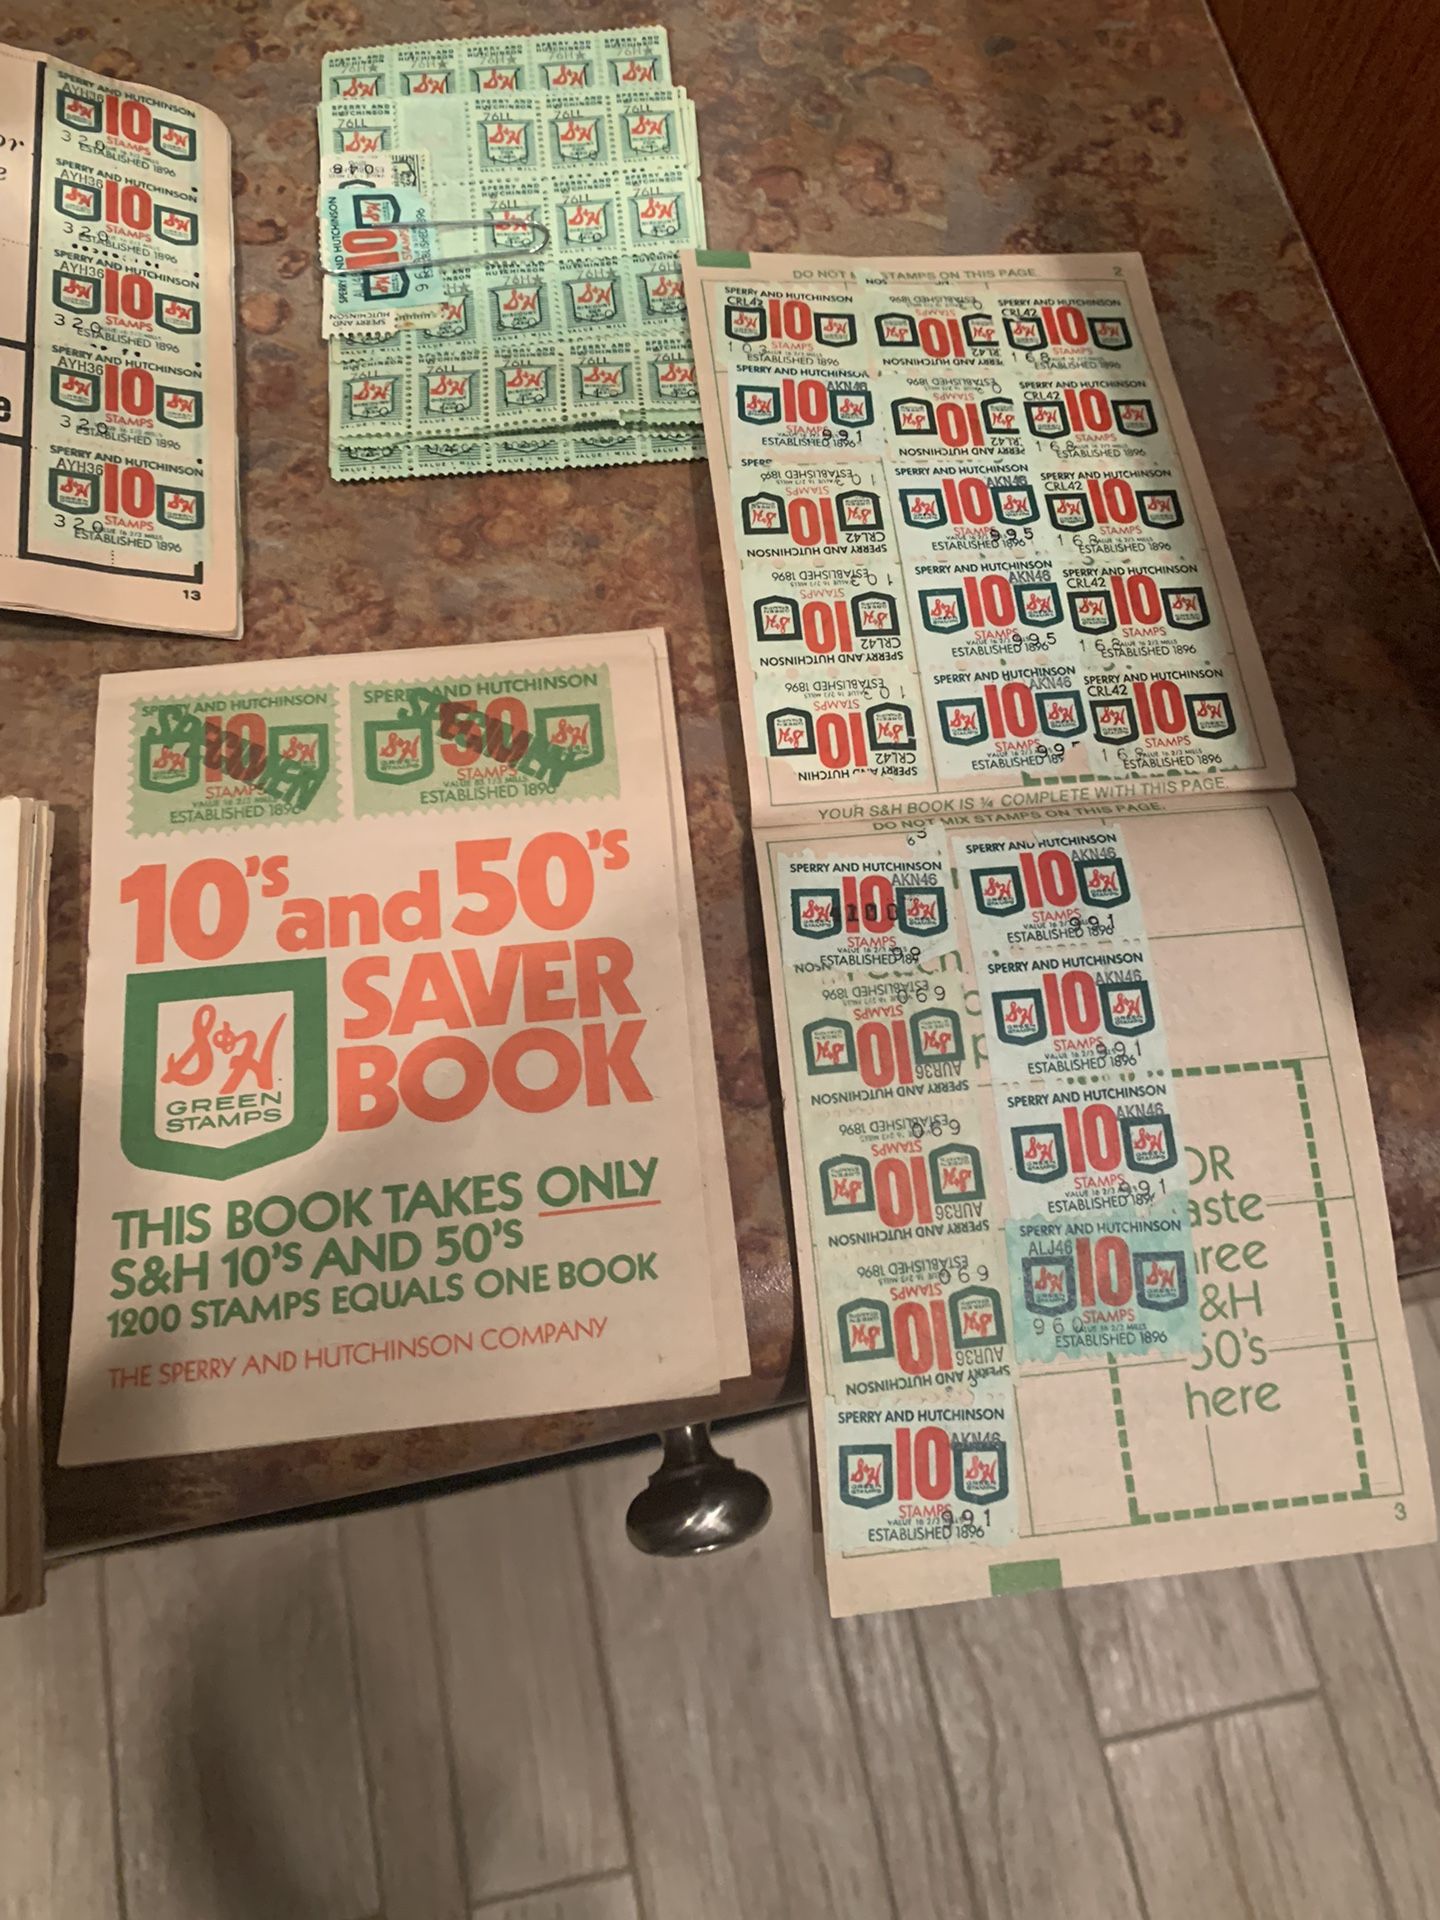 S &H Green Stamps